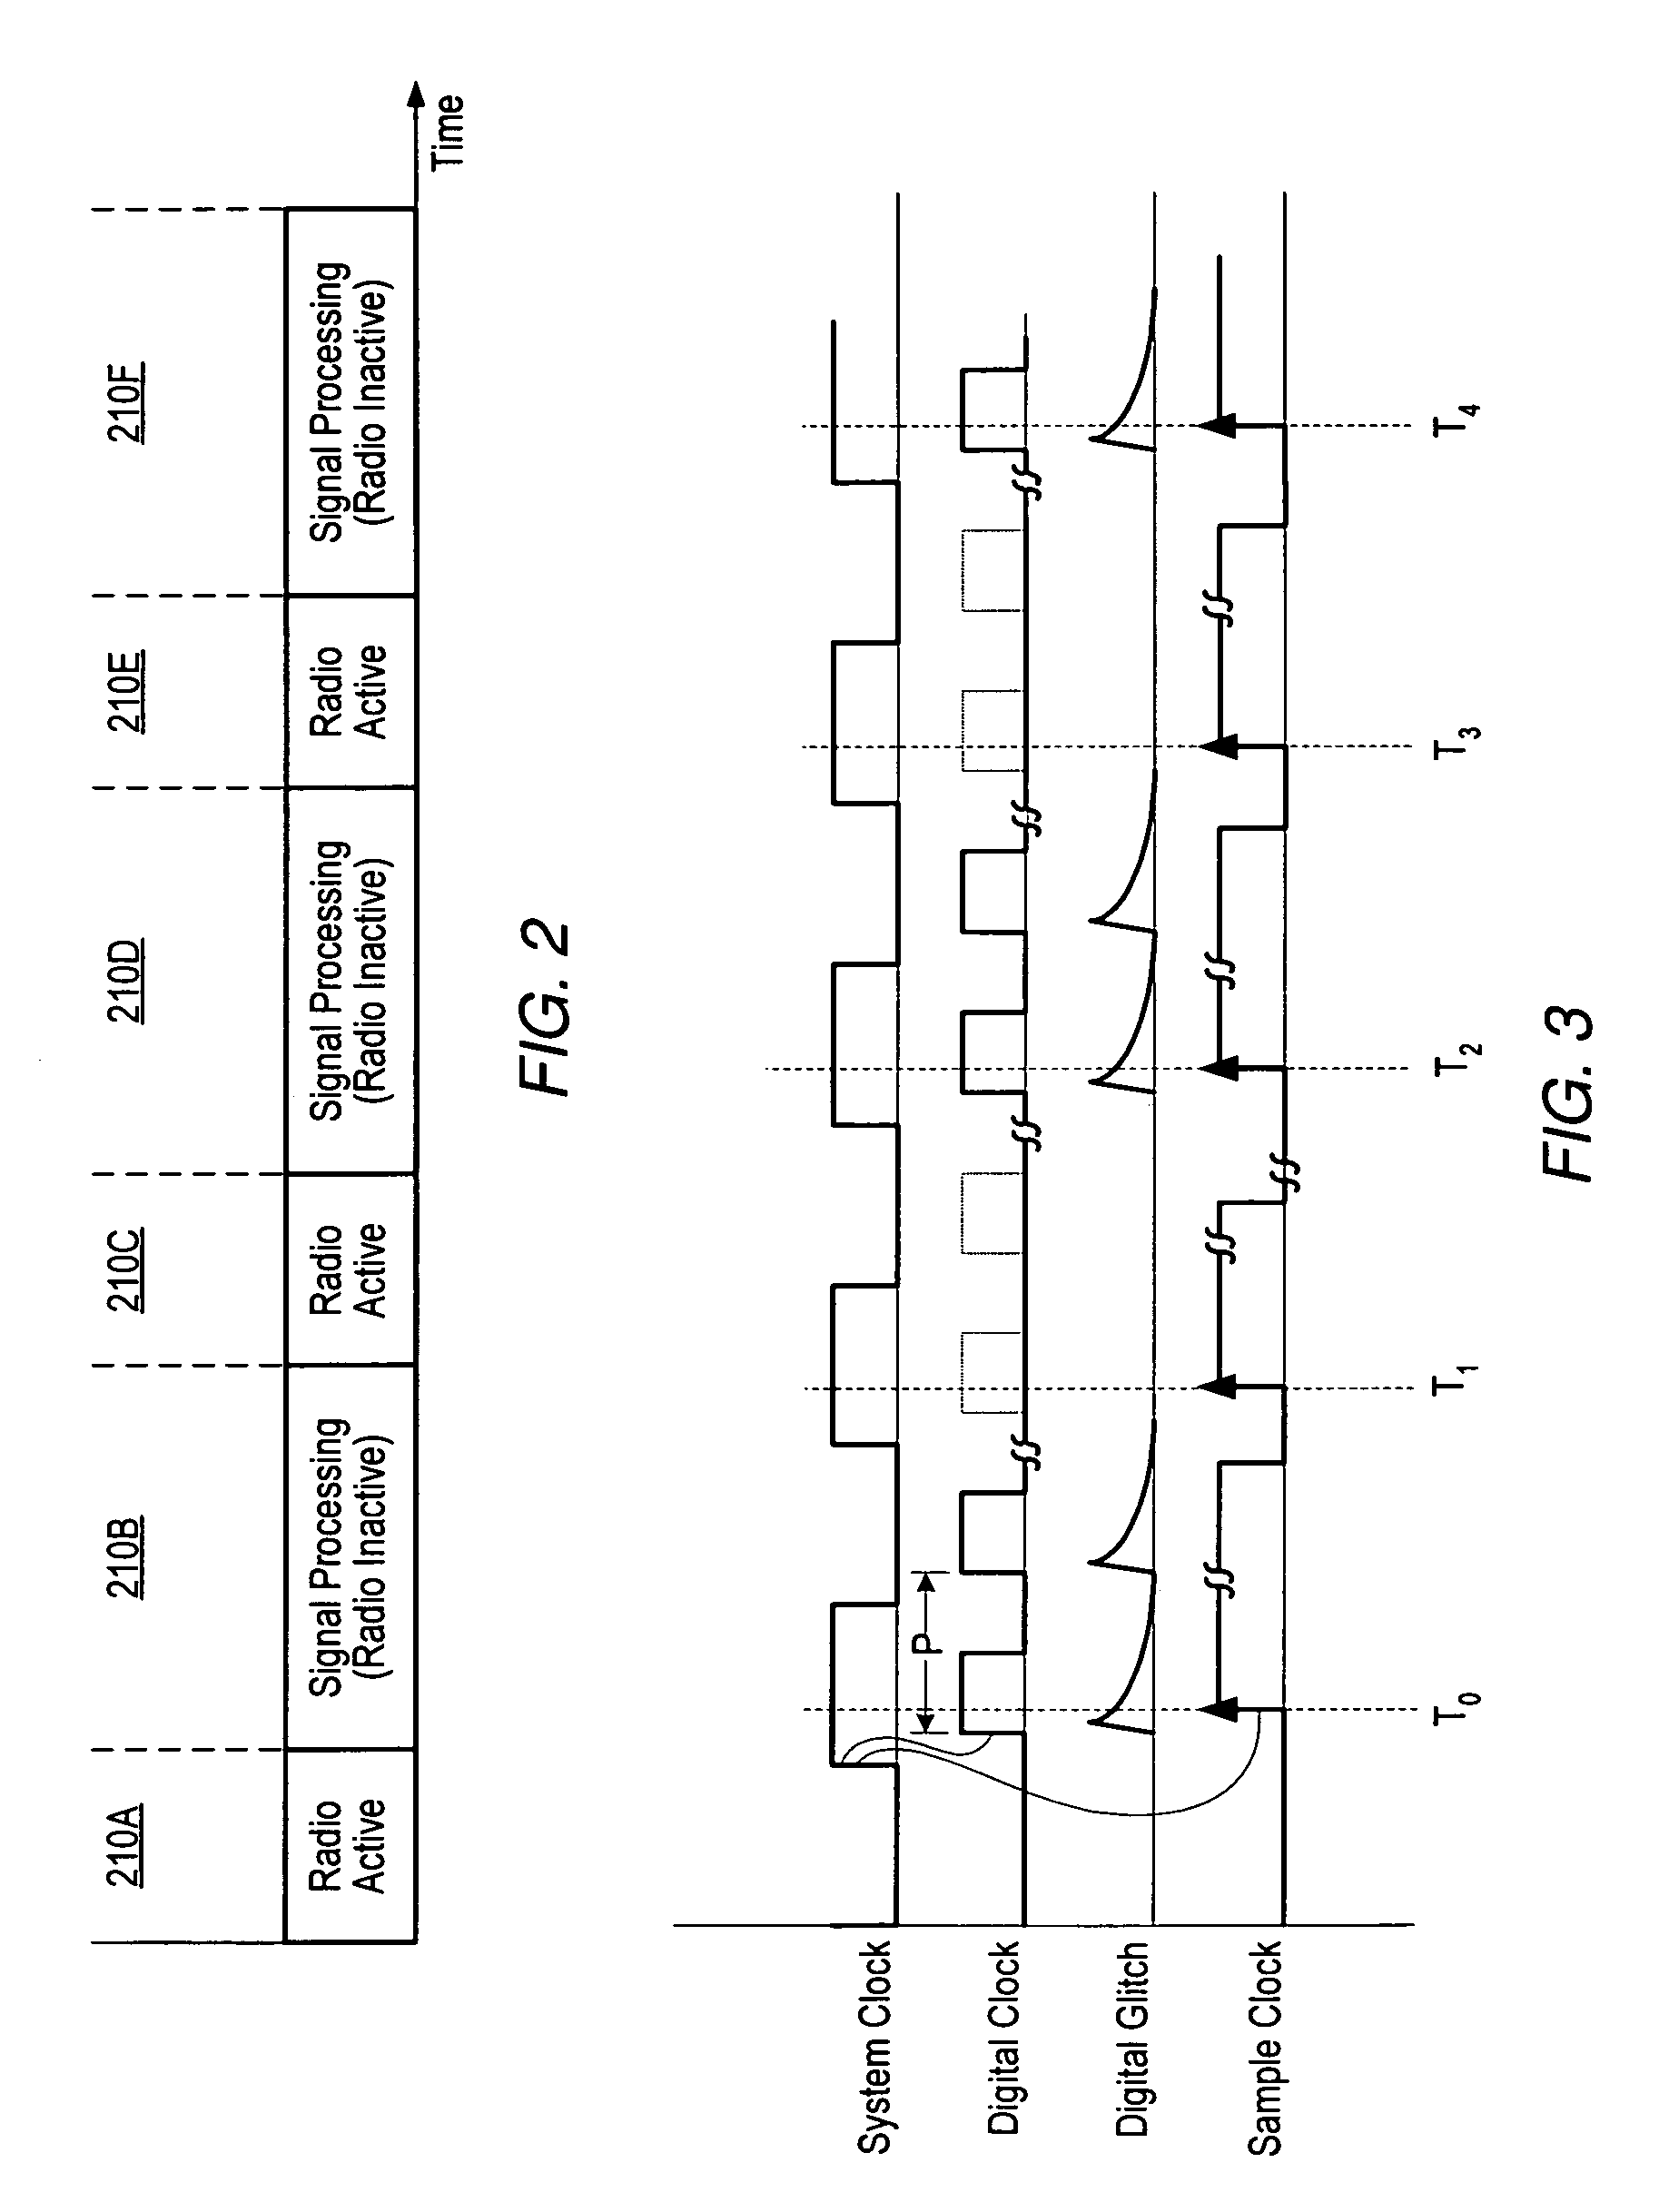 Method and system for sampling a signal